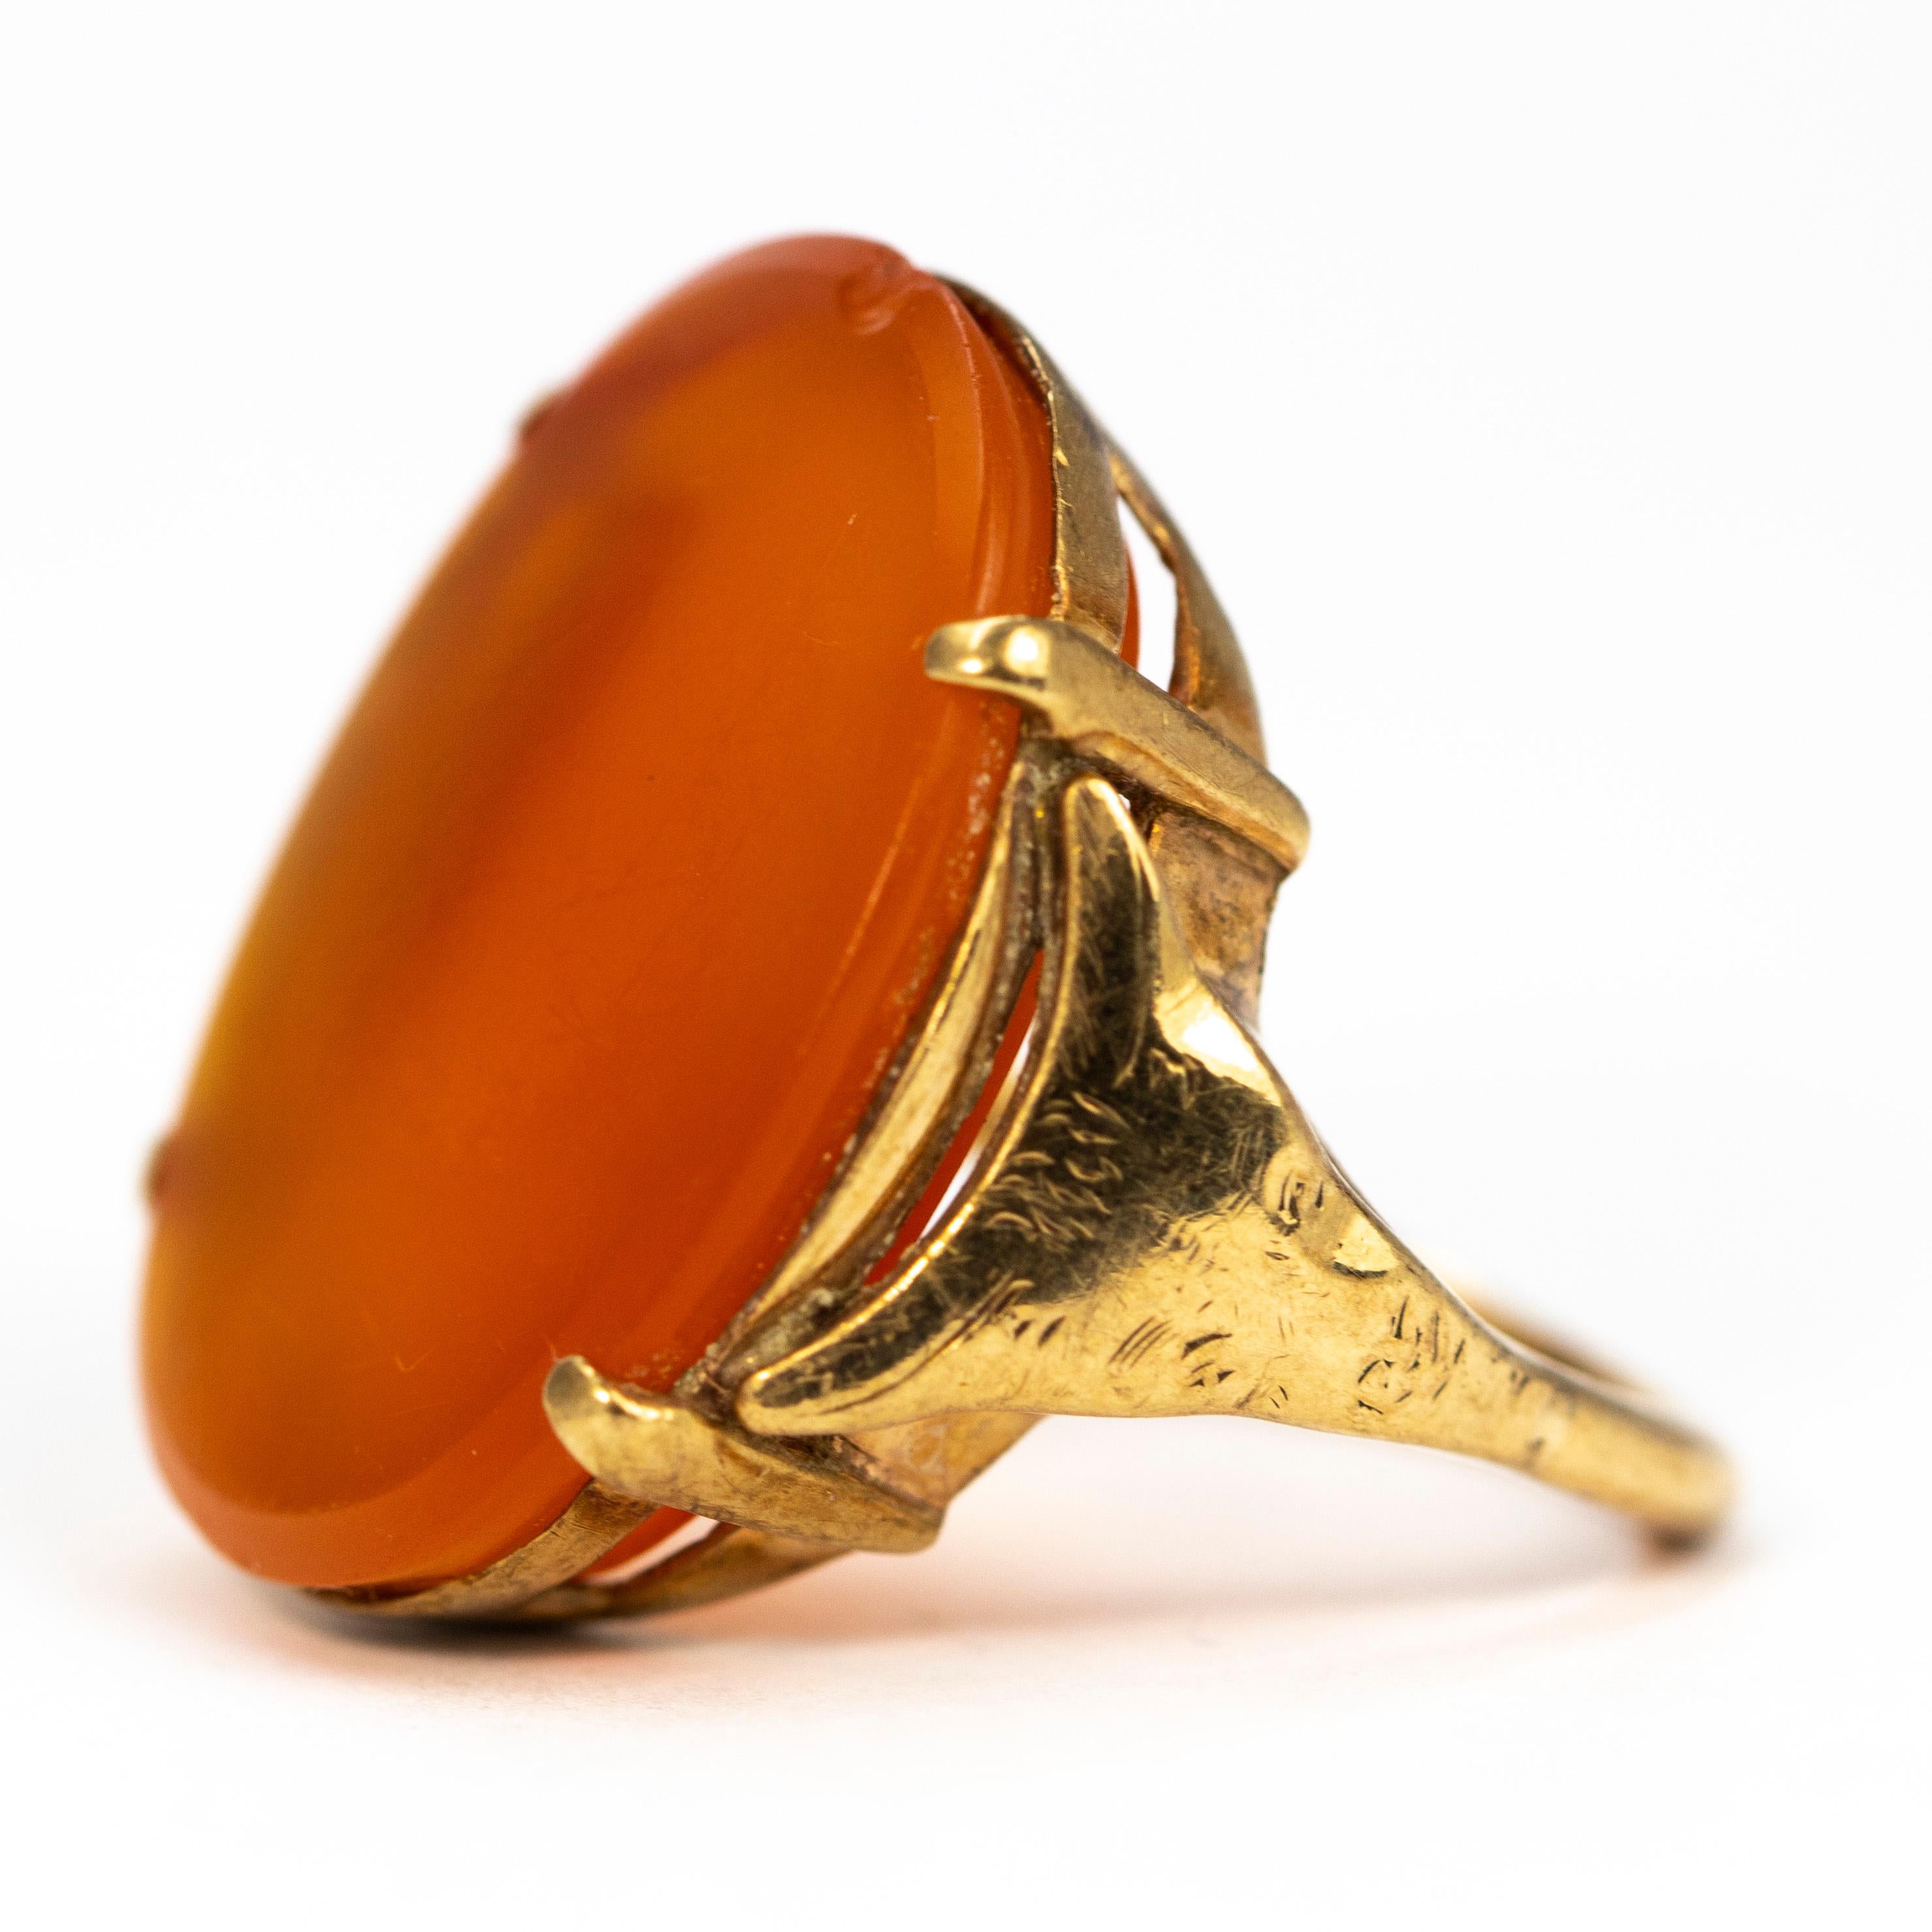 The giant carnelian stone in this ring is gorgeous, glossy and a pretty deep orange colour. The size of the stone is sure to grab some attention! It is held within four delicate claws which let the stone really speak for itself!

Ring Size: M 1/2 or